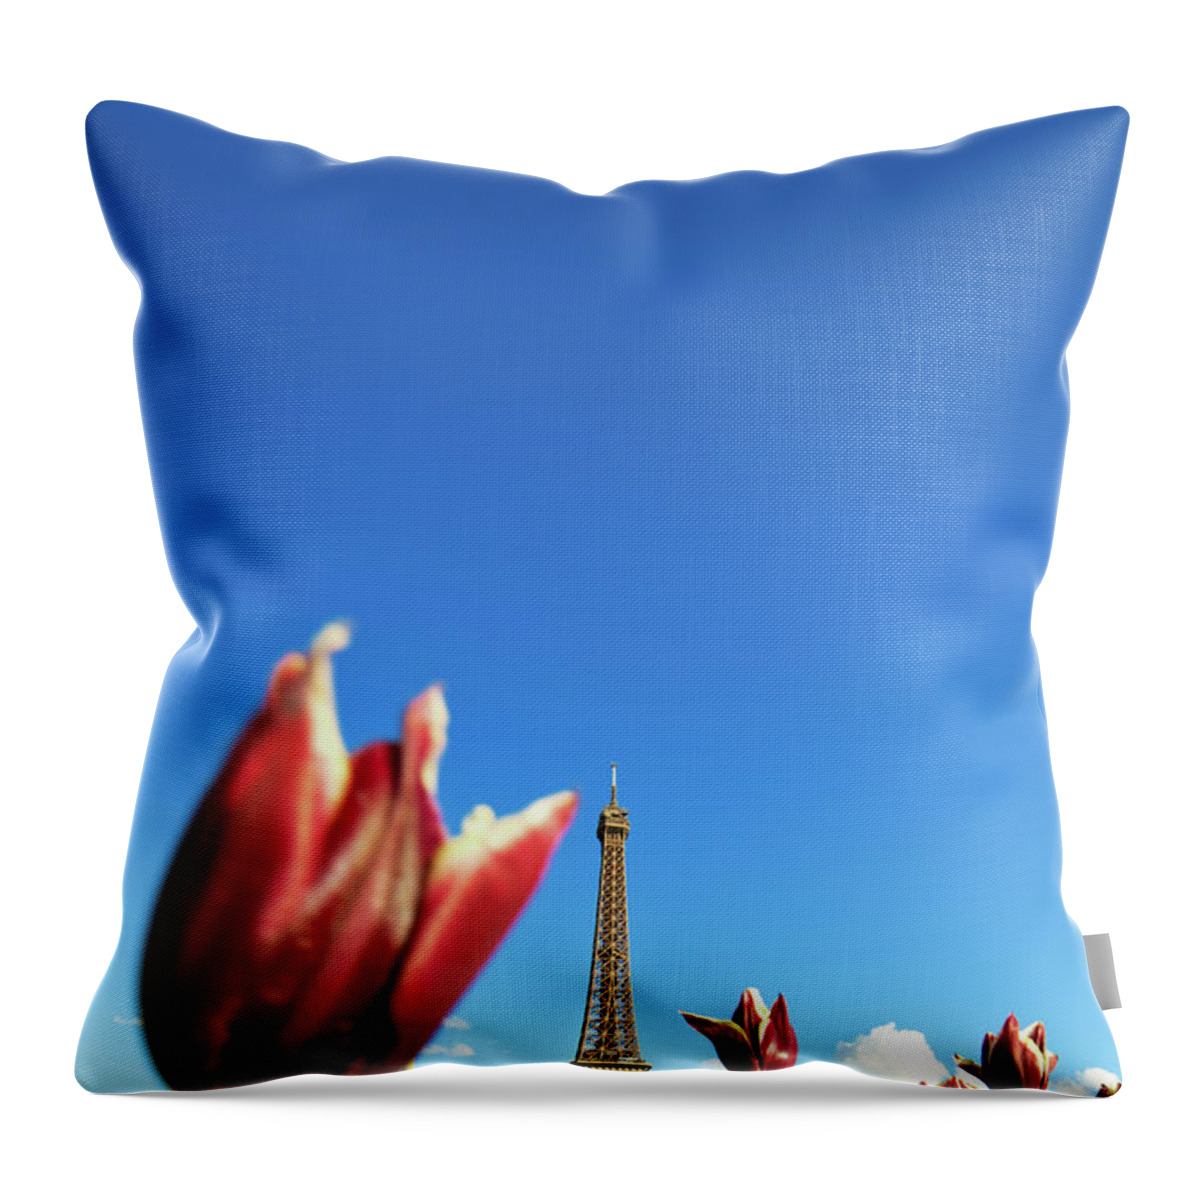 Scenics Throw Pillow featuring the photograph Paris In Spring by Nikada